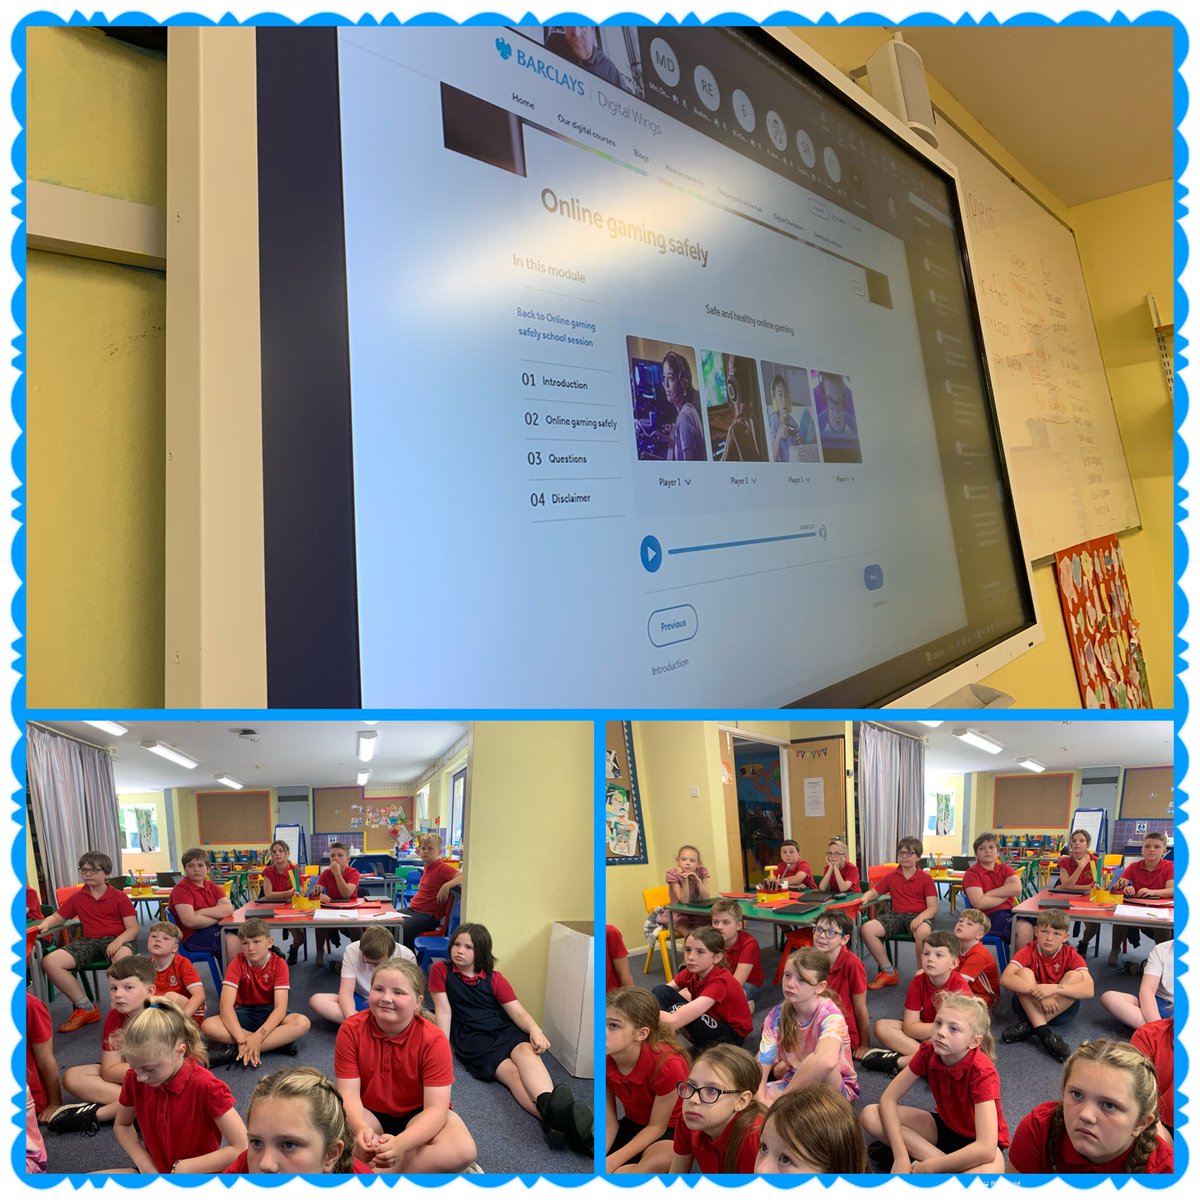 Thank you @Digitaleagles for Dosbarth Helyg’s session today! It was great to be reminded about how to stay safe online and think about our online reputation! #EthicalElin #TEAMOaklands